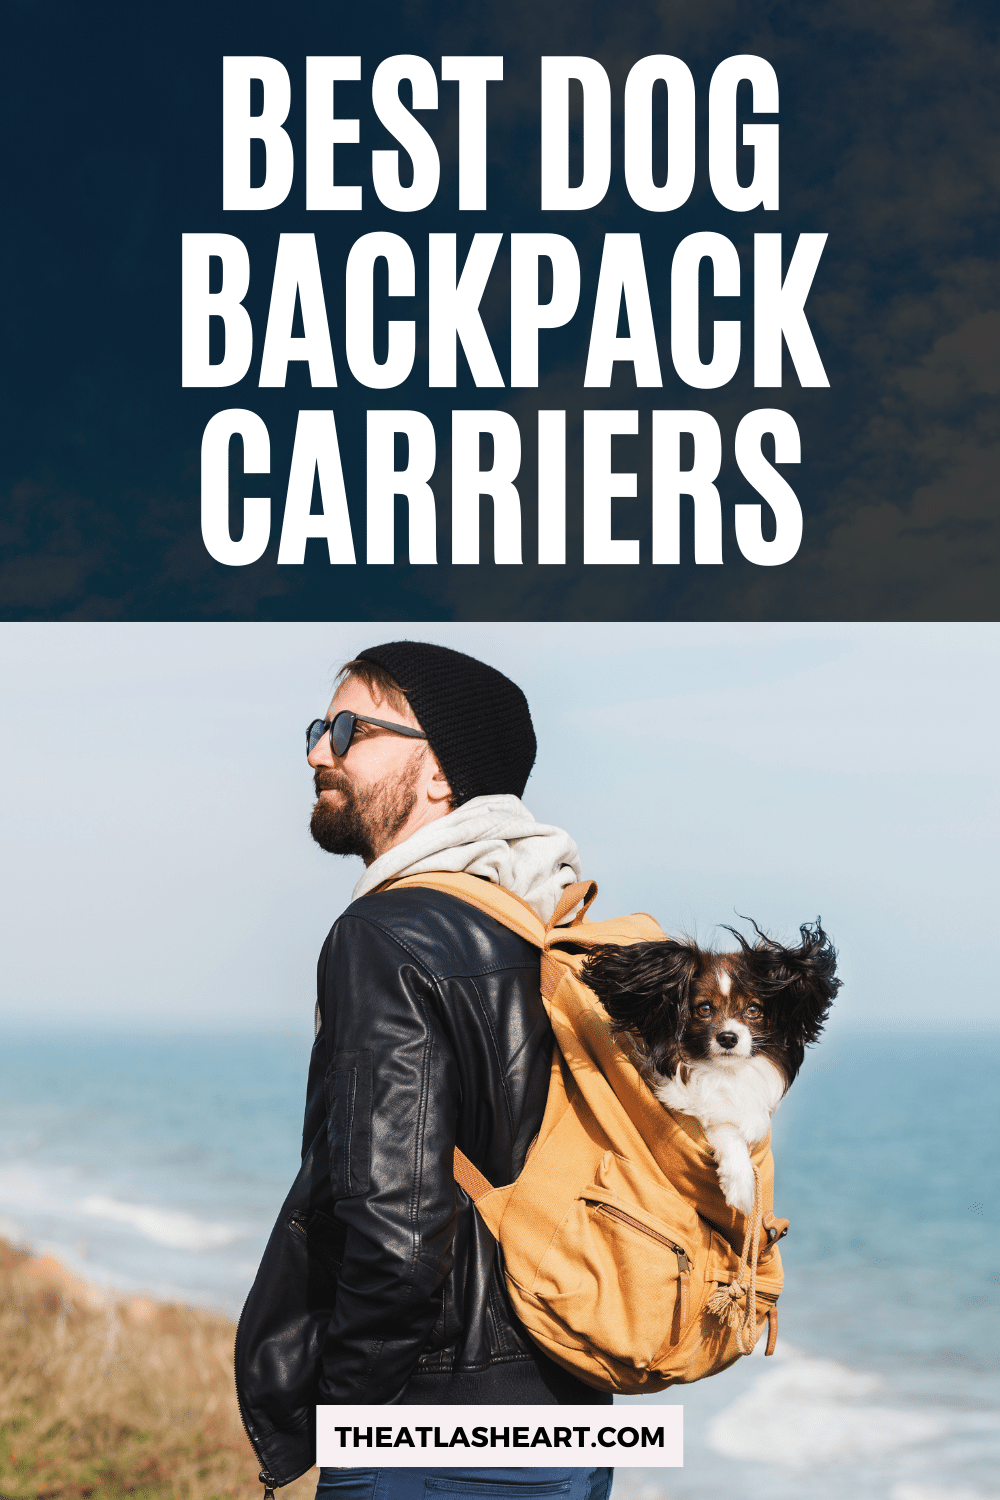 12 Best Dog Backpack Carriers for Hiking With Your Pup in 2022